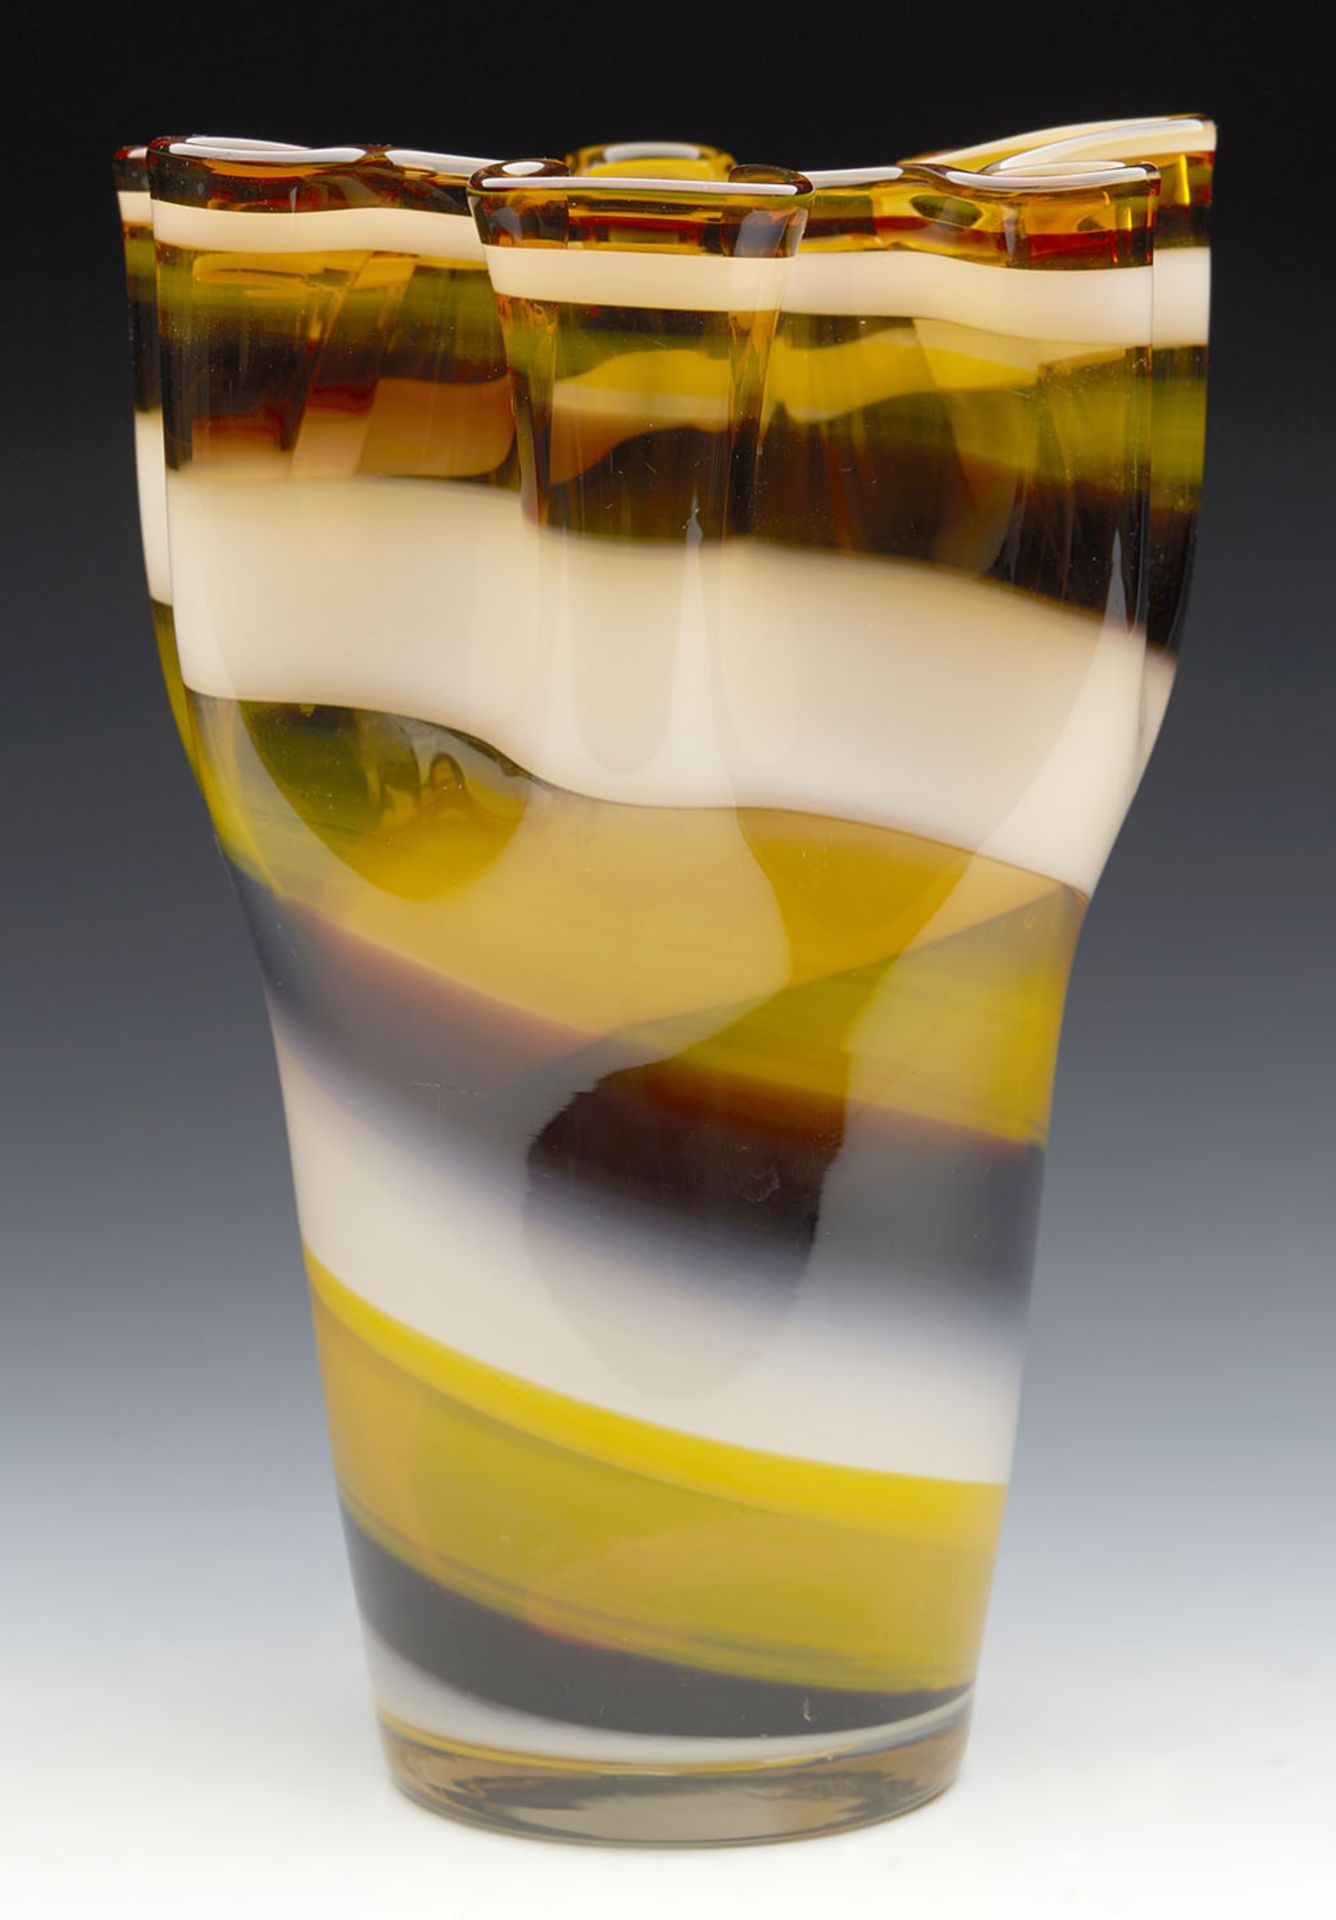 Vintage Italian Art Glass Vase With Fazzoletto Top 20Th C. - Image 4 of 9